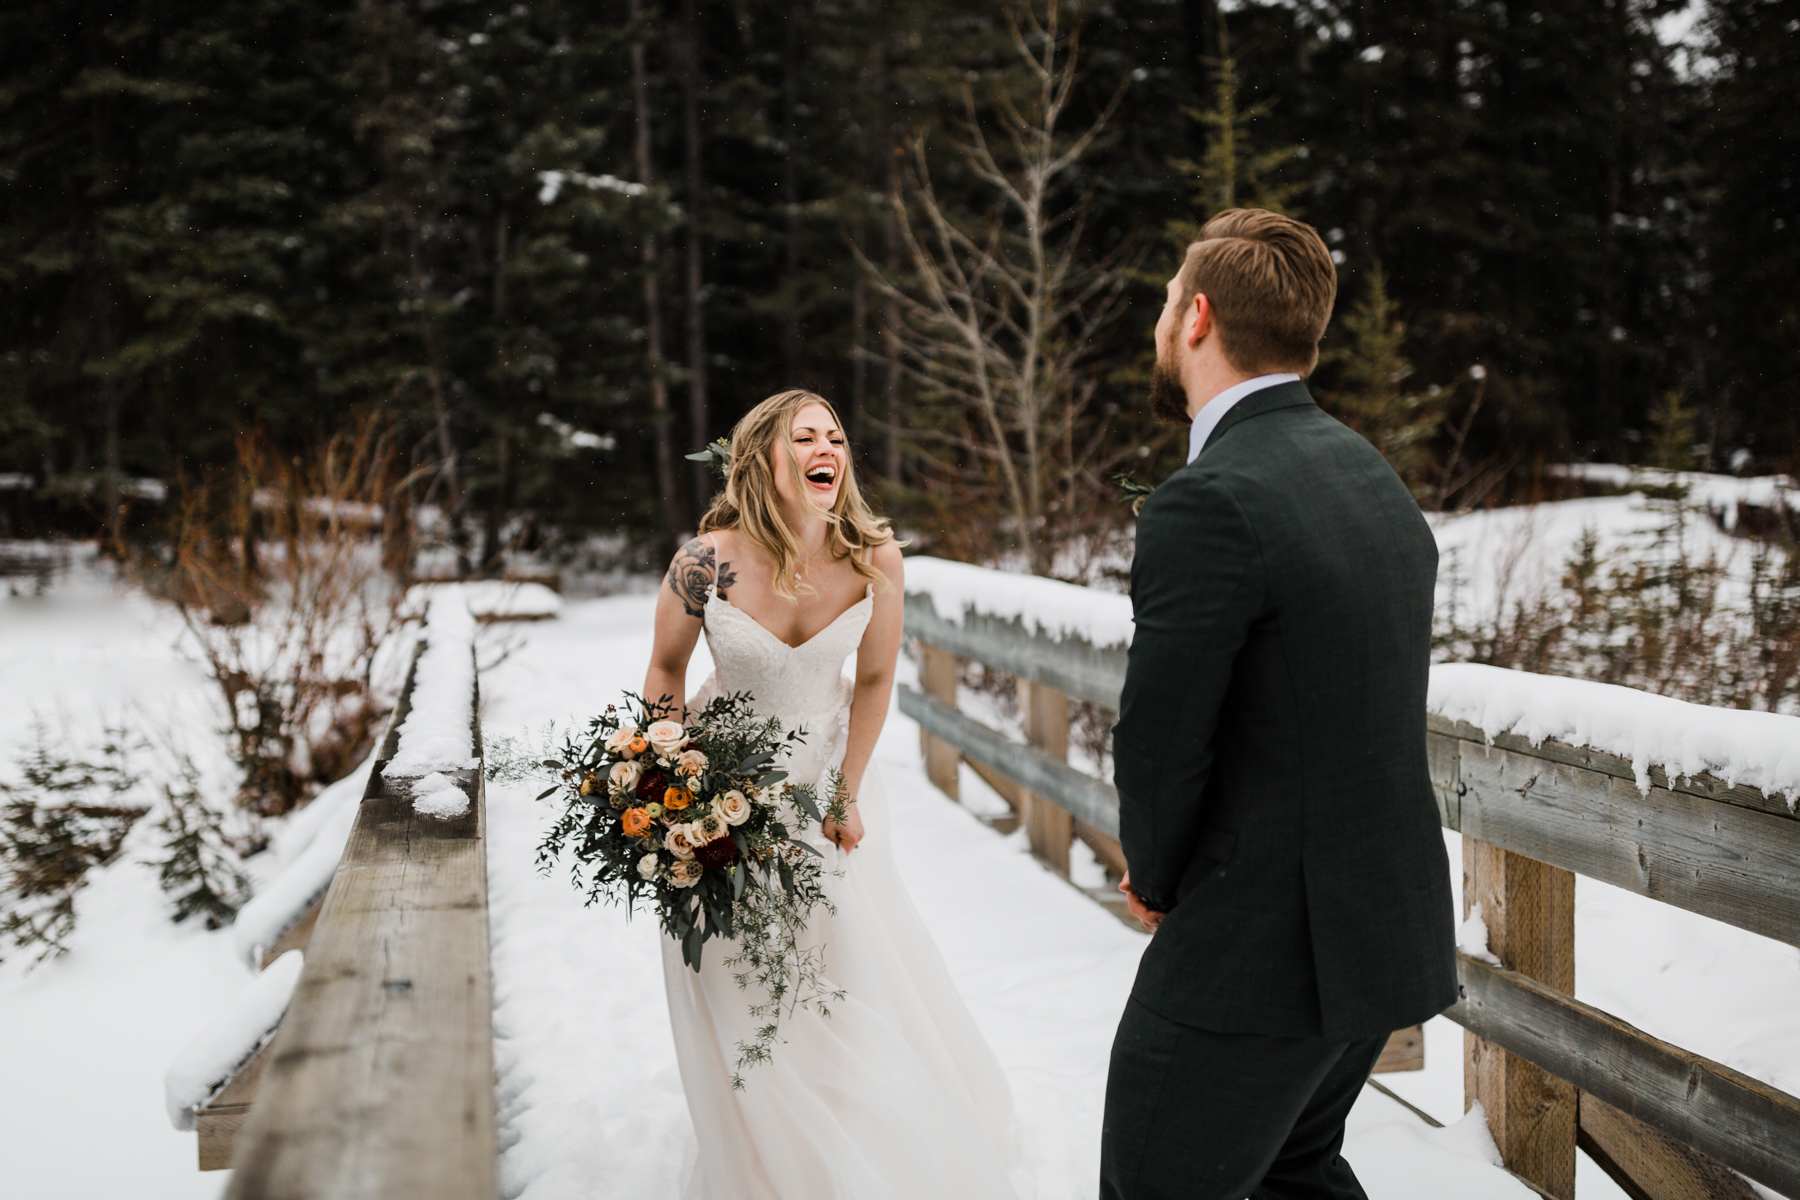 Canmore Elopement Photographer in the Canadian Rockies - Image 14